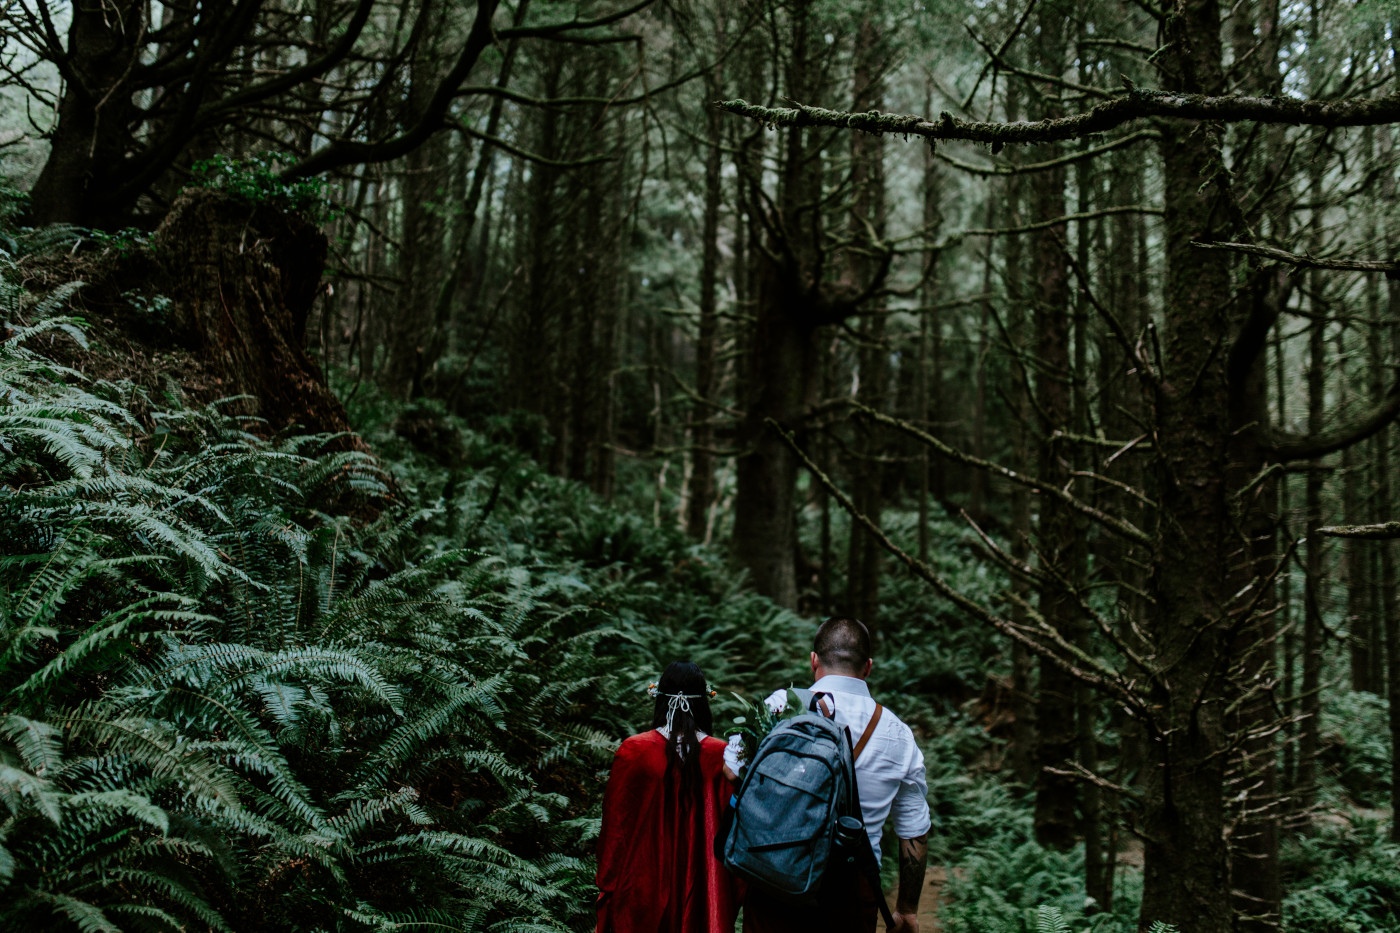 TJ and Allison hike together in the woods in Cannon Beach, OR.